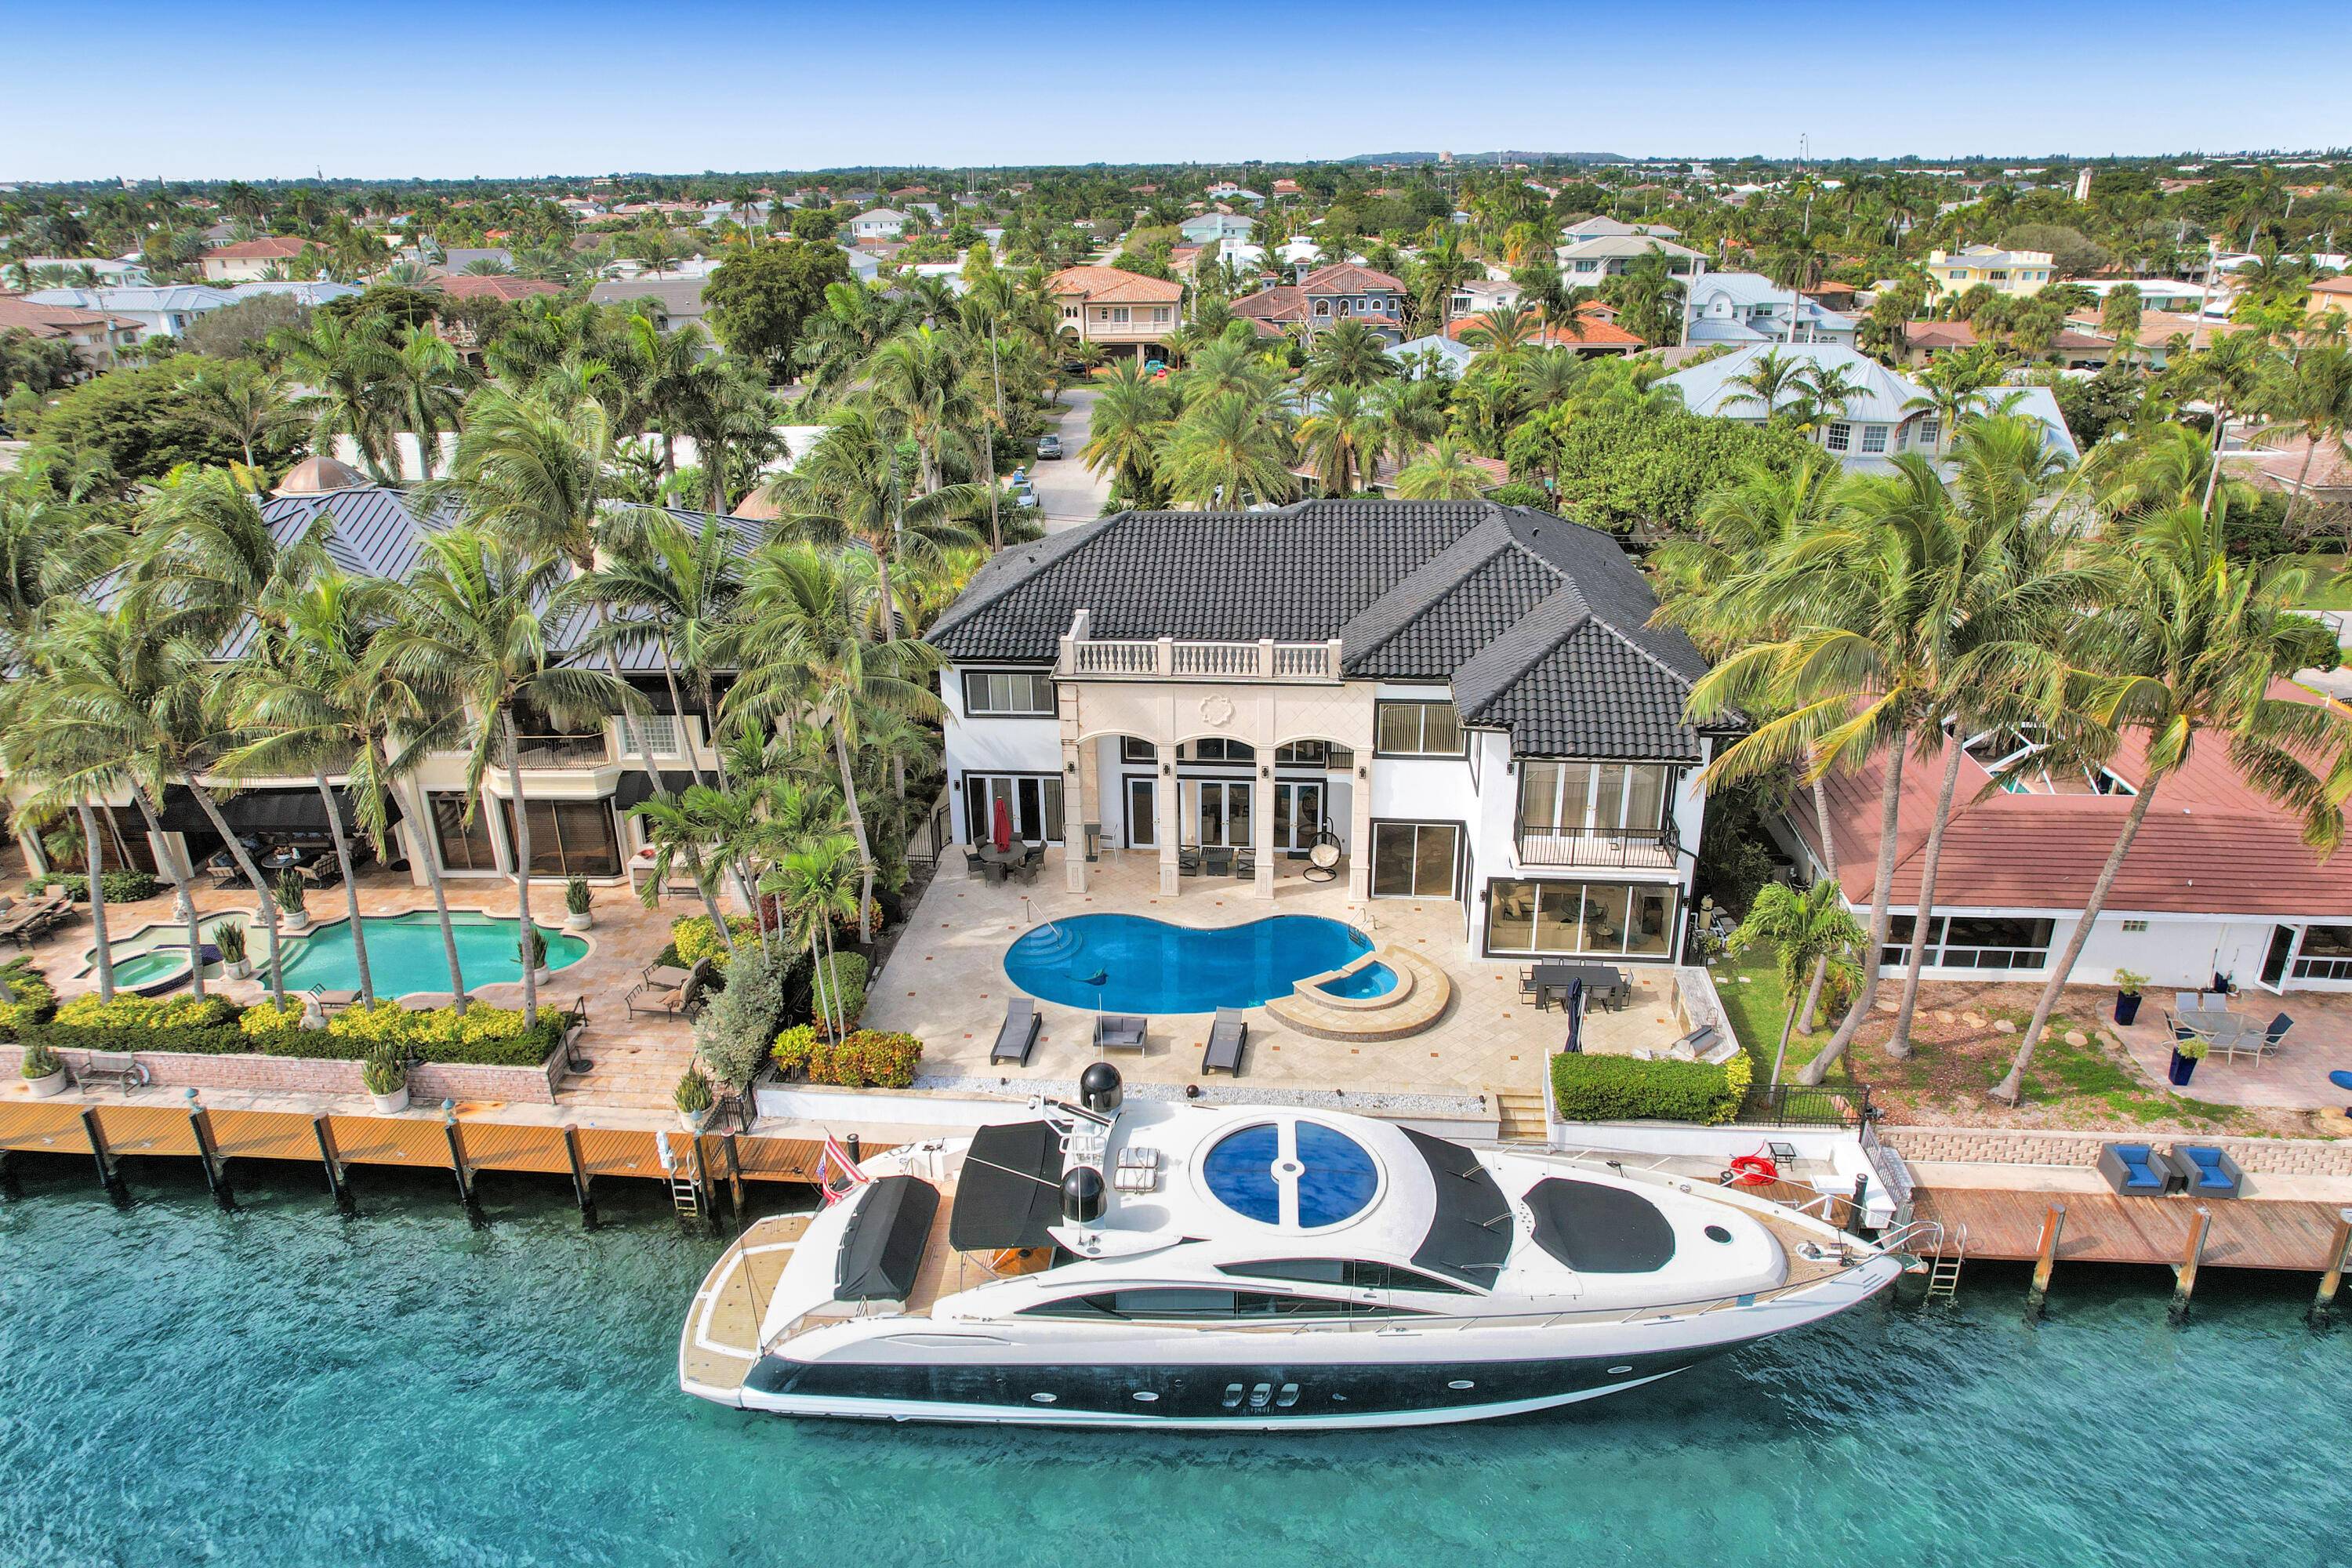 Bring your yacht ! Stunning fully furnished single family home, directly on the Intracoastal in the highly sought after Lake Placid area of Lighthouse Point.